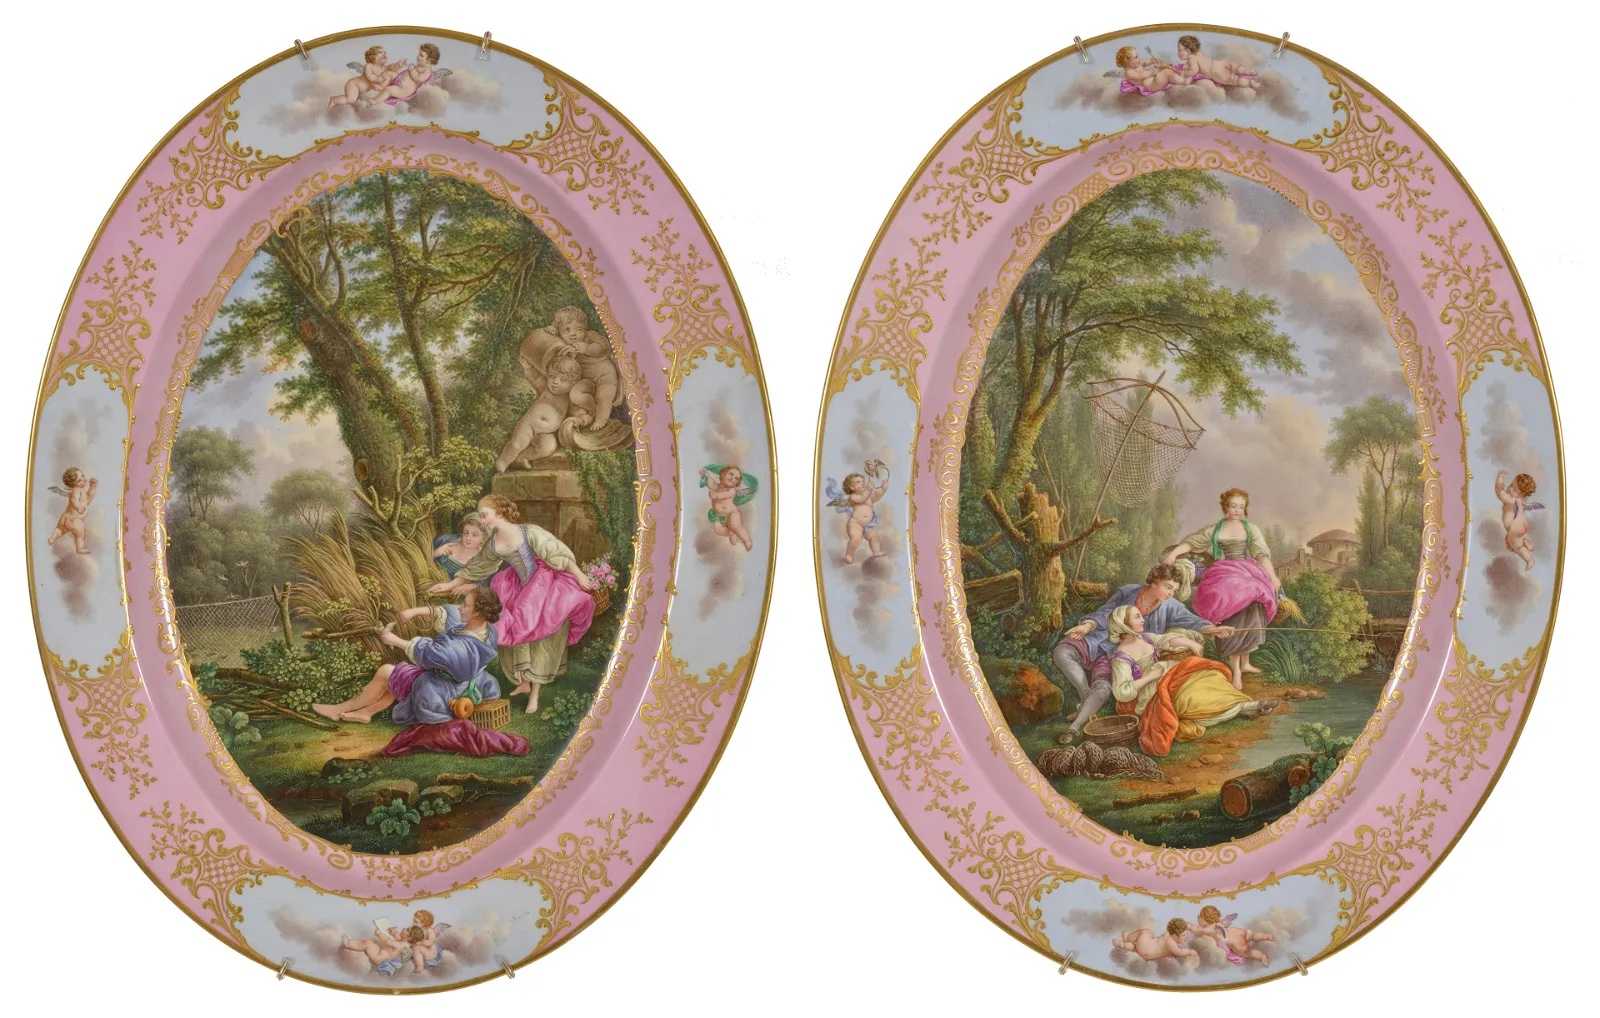 Barr and Barr Worcester Flight porcelain large oval plaques, estimated at $3,000-$5,000 at Tremont Auctions.